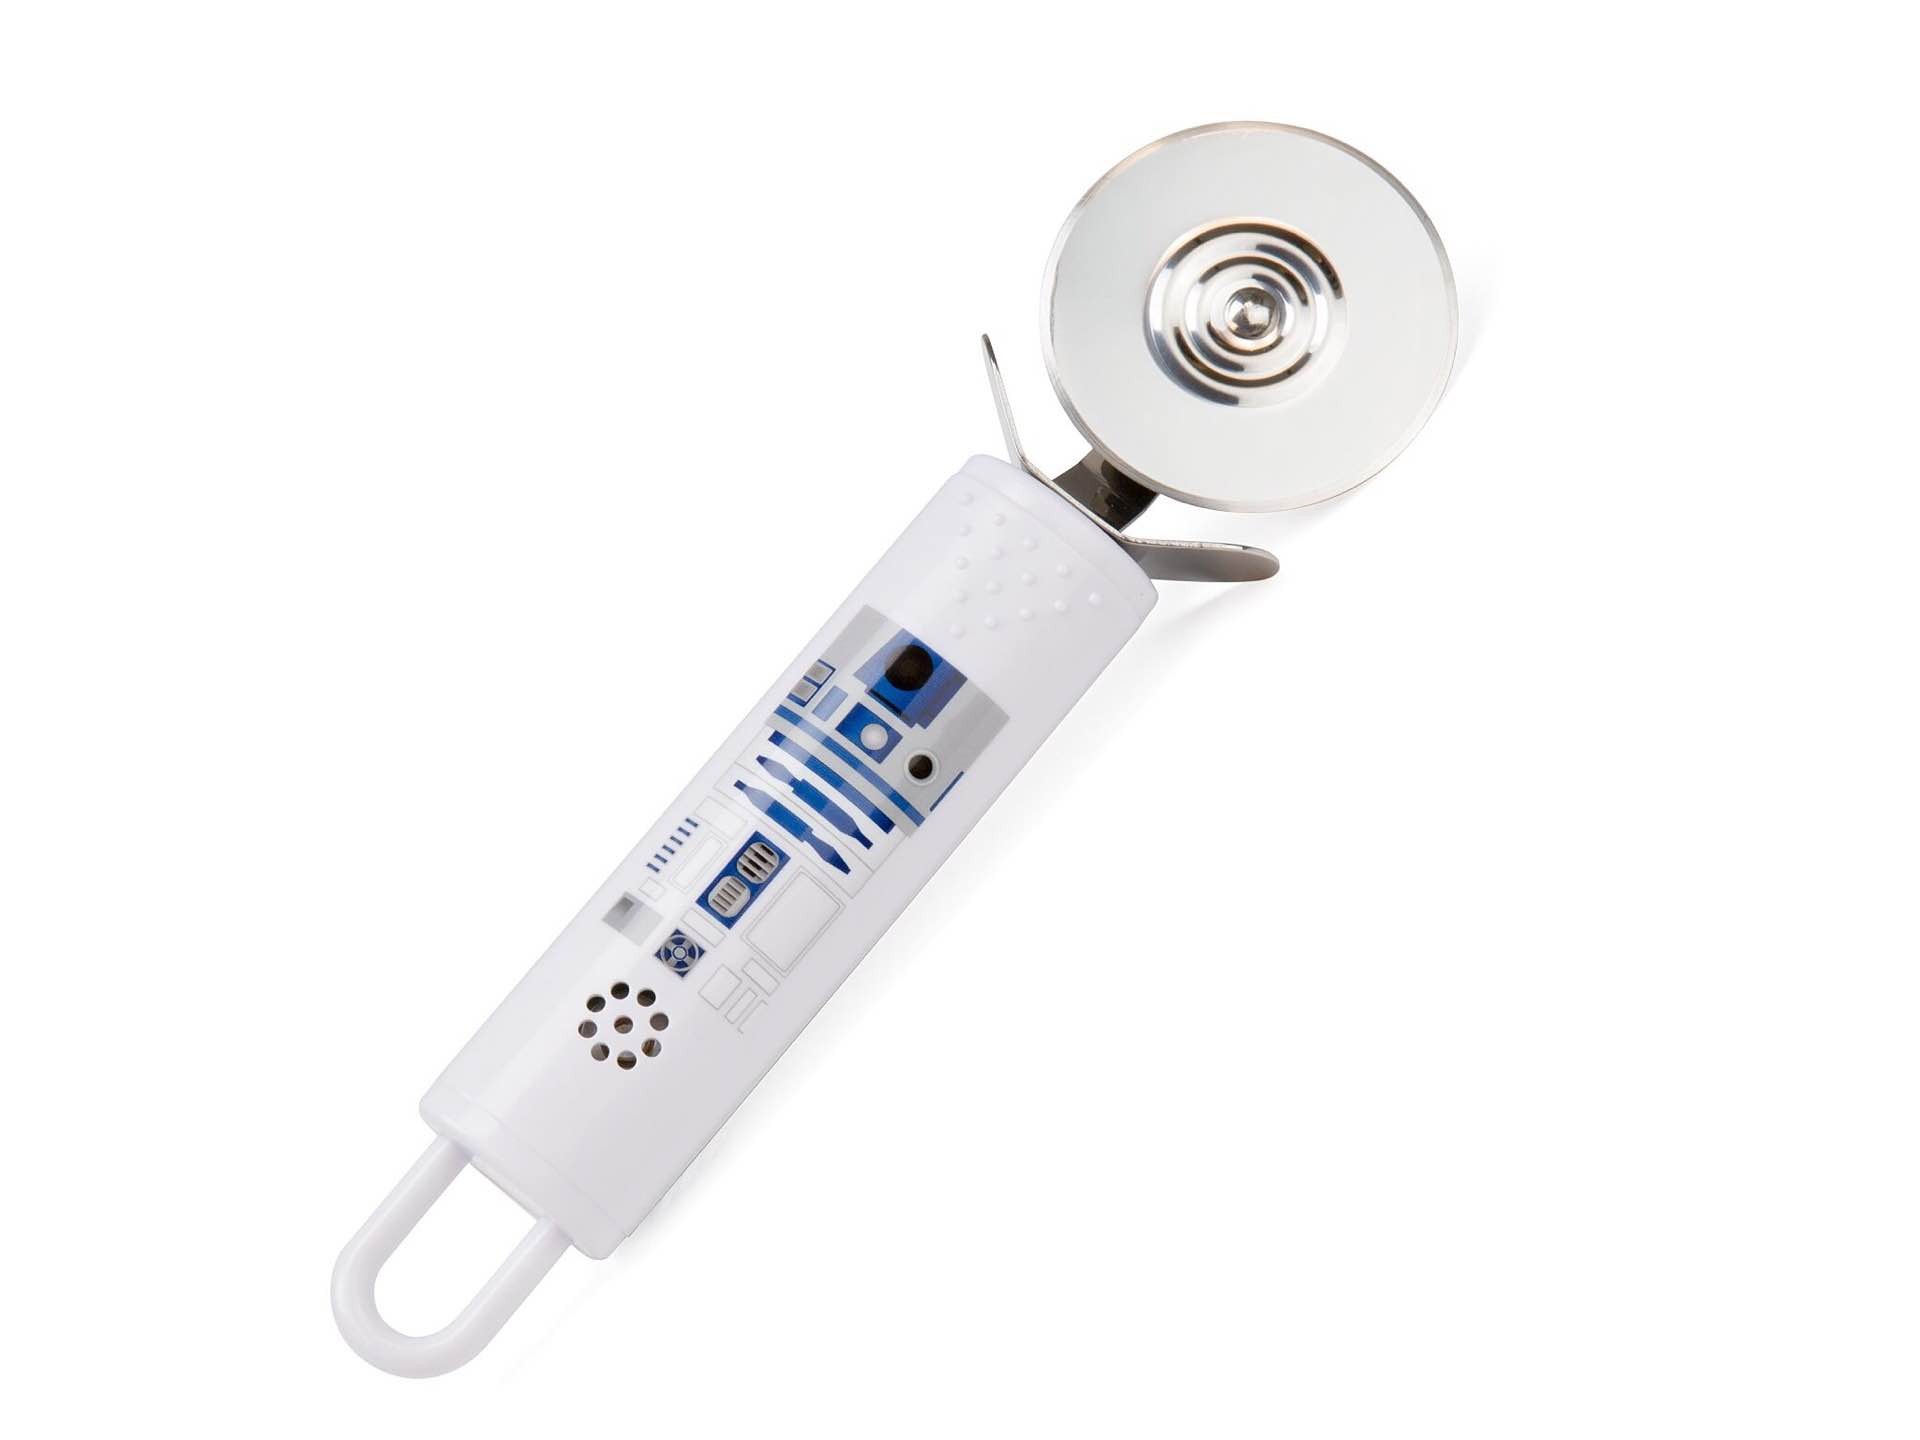 Star Wars R2-D2 pizza cutter with sound effects. ($20)